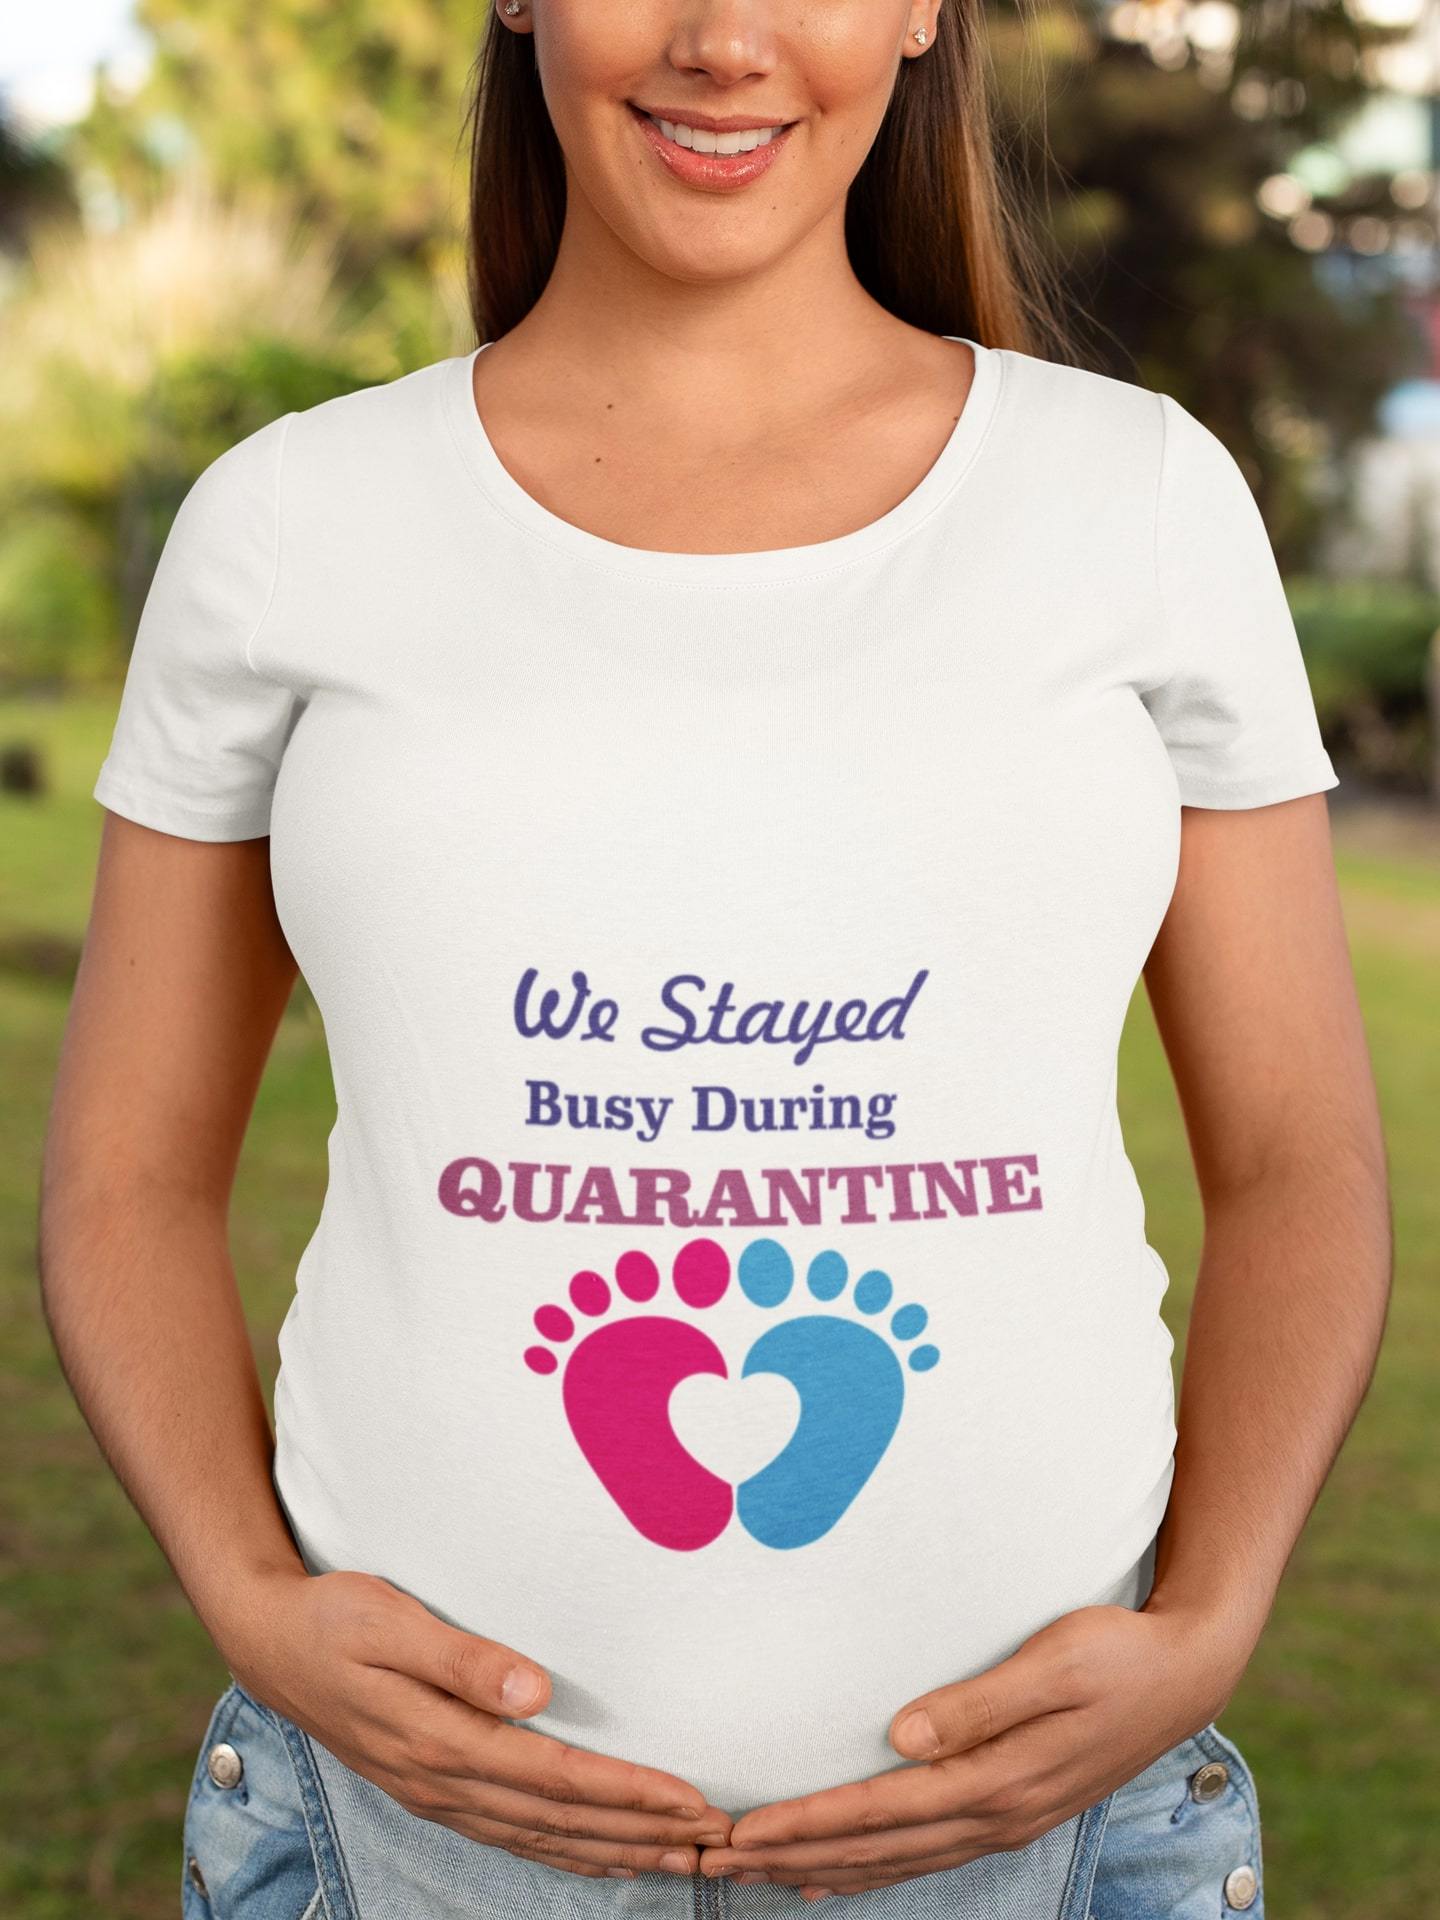 thelegalgang,Busy During Quarantine Graphic Maternity T shirt,WOMEN.